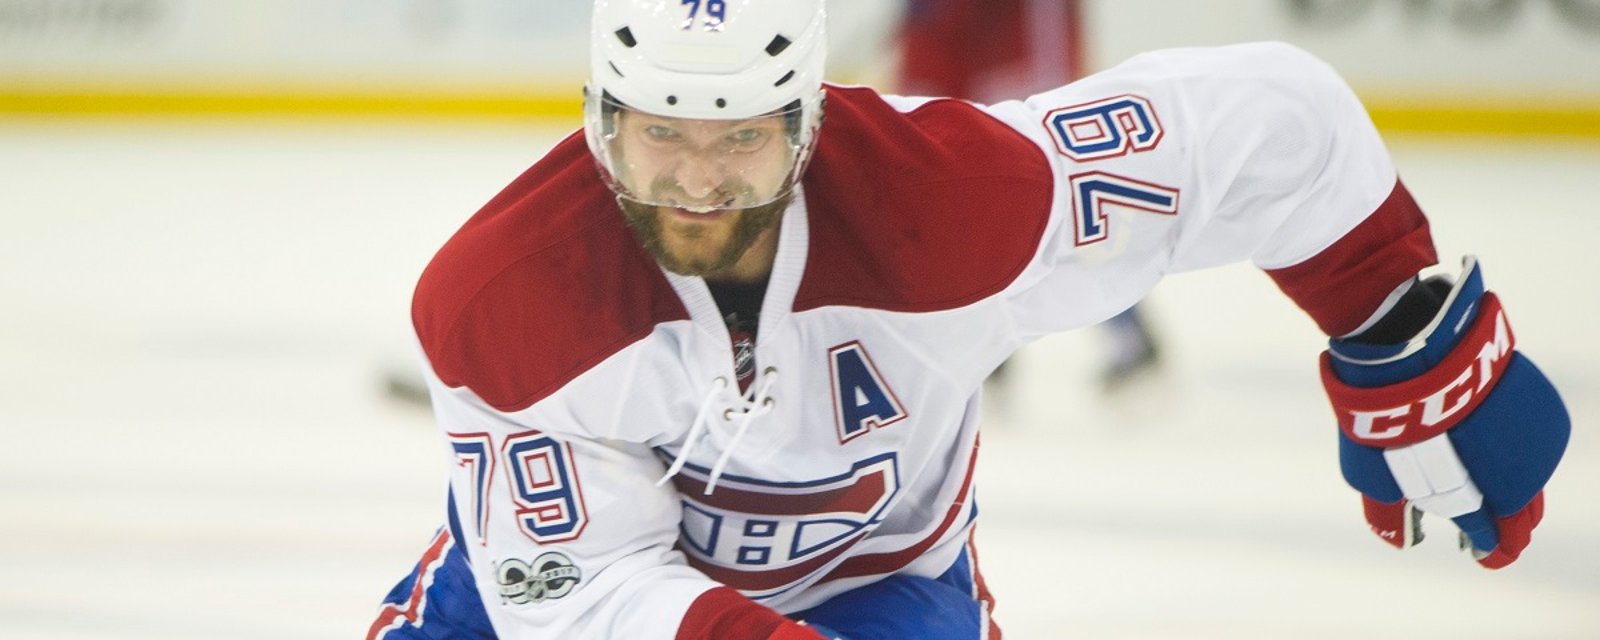 Andrei Markov confirms he intends to return to the NHL.